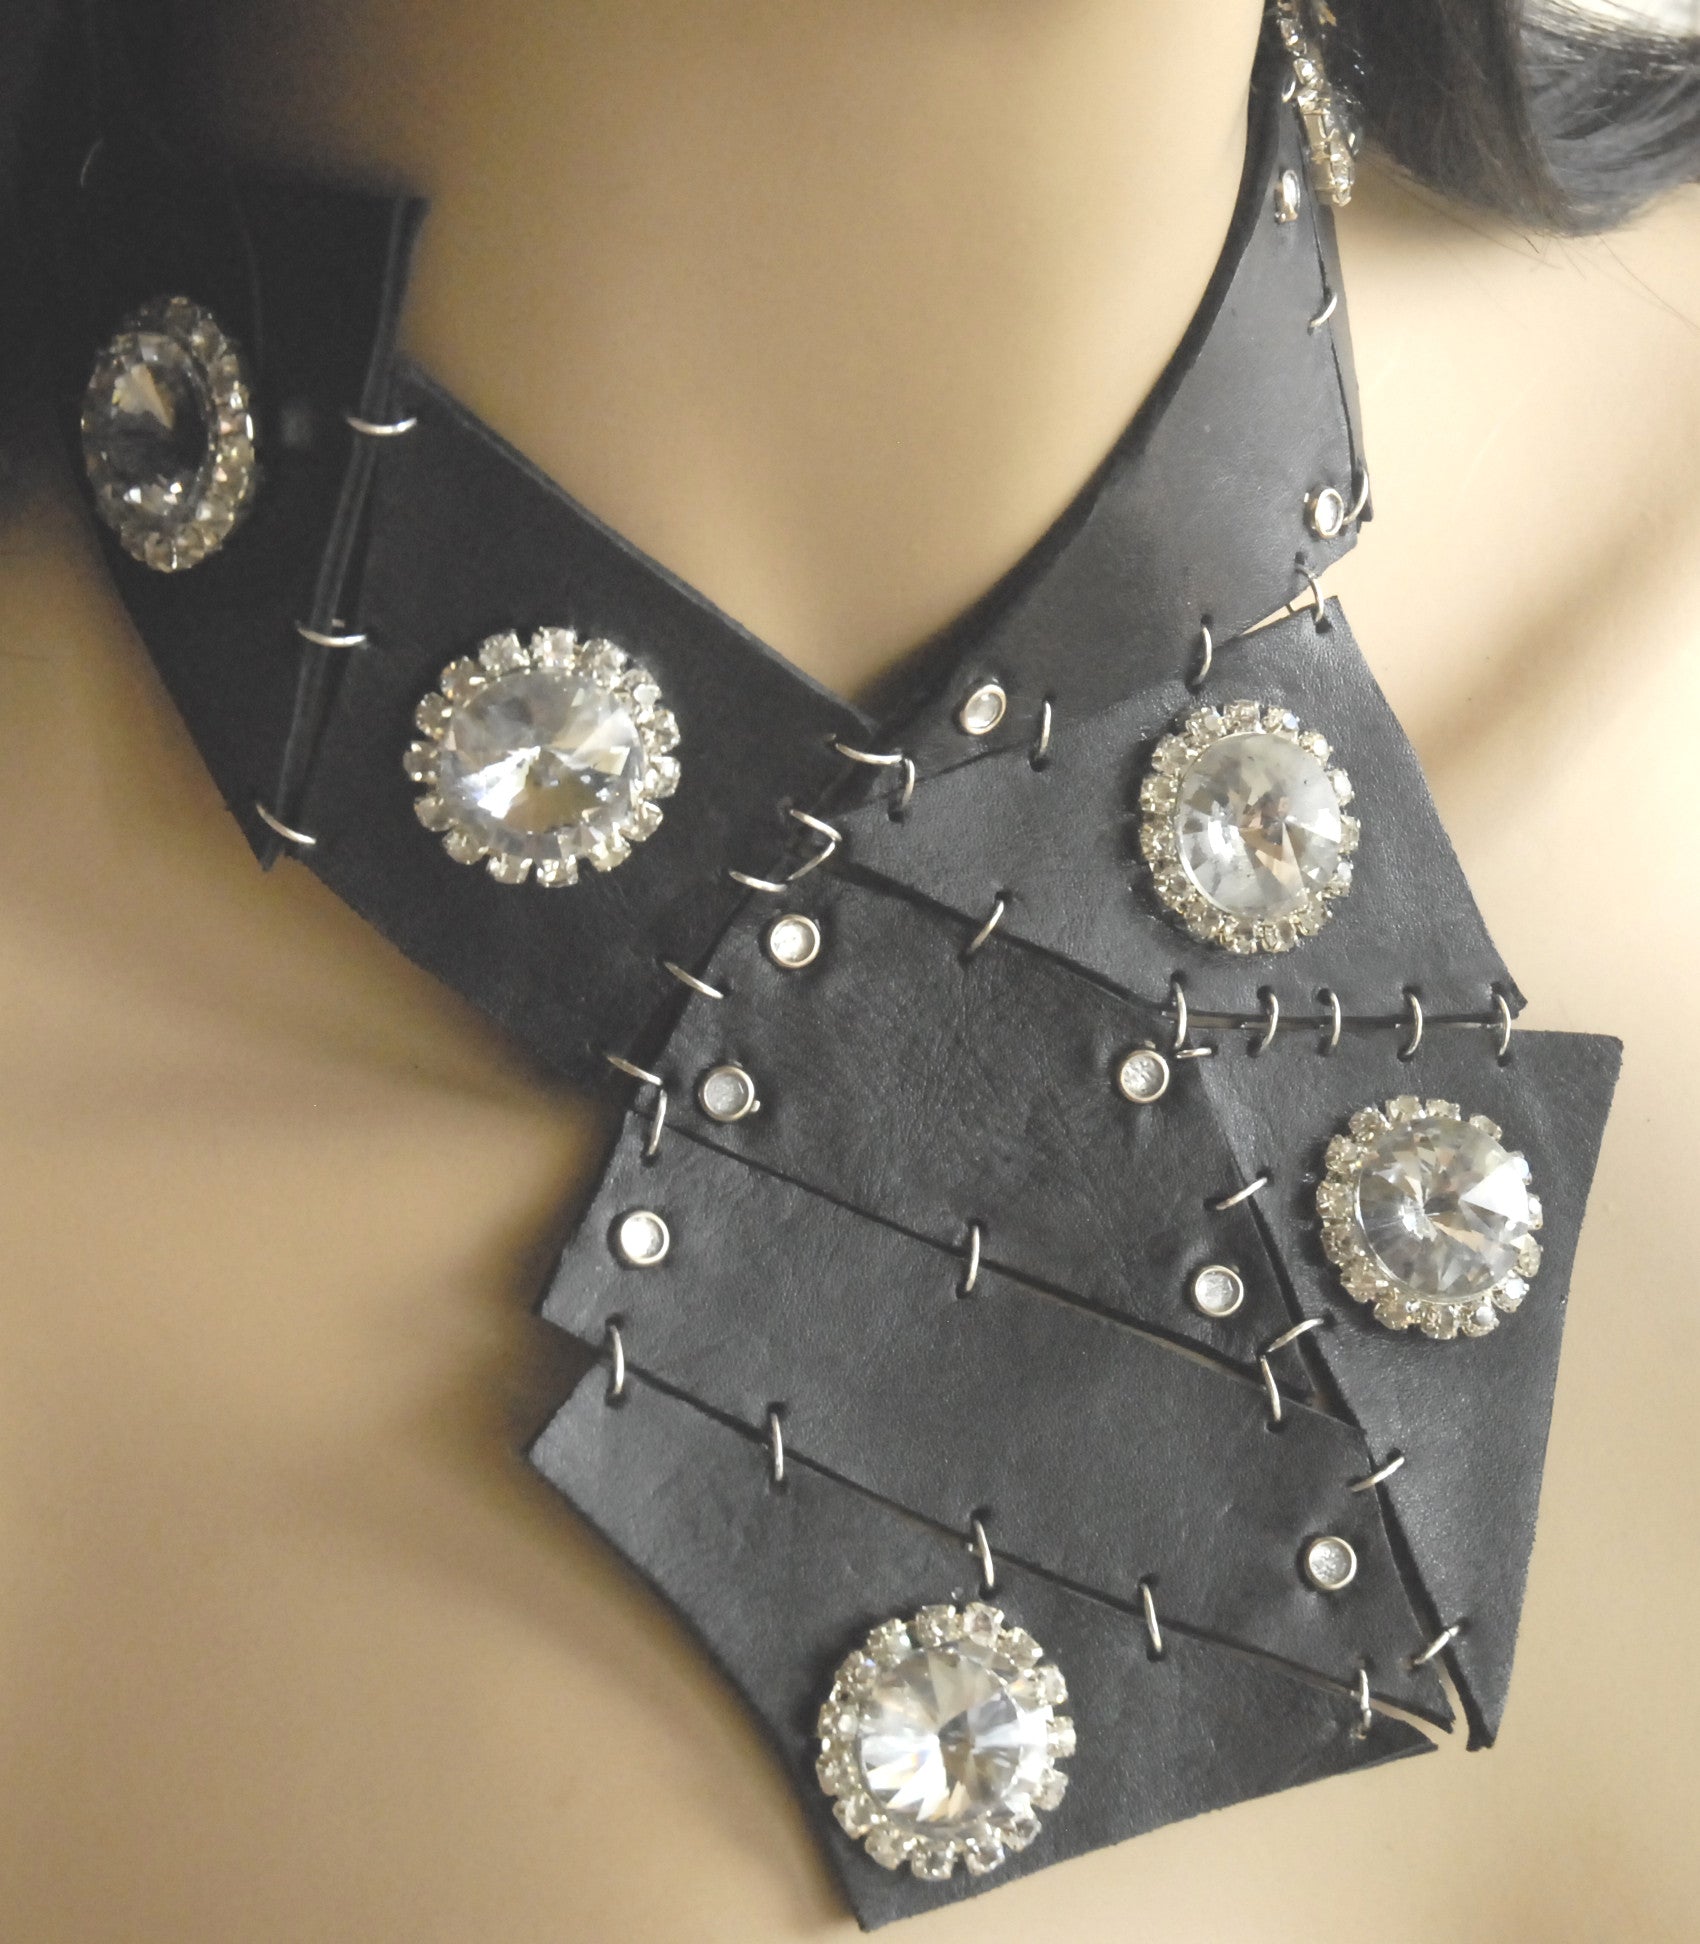 Black leather necklace with fancy diamonds